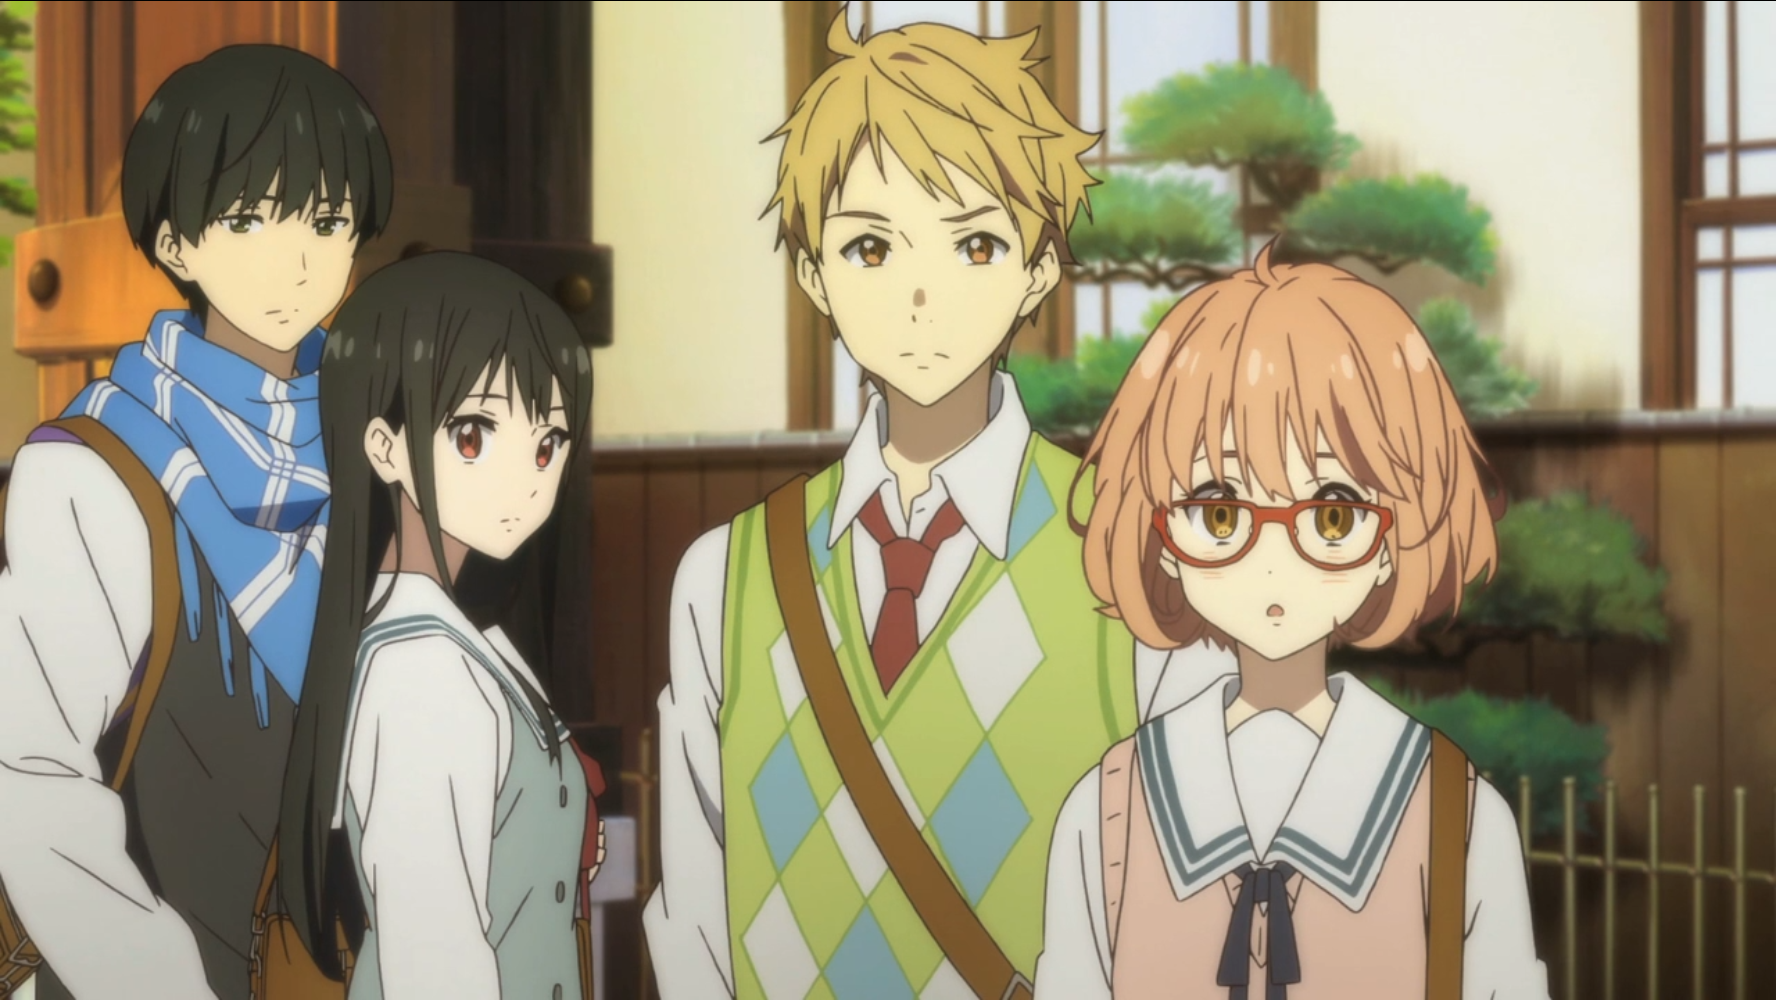 Hiromi Nase, Mitsuki Nase, Akihito Kanbara, and Mirai Kuriyama gather at the Nase family household to plan how to deal with a looming yomu threat in a scene from the 2013 Beyond the Boundary TV anime.